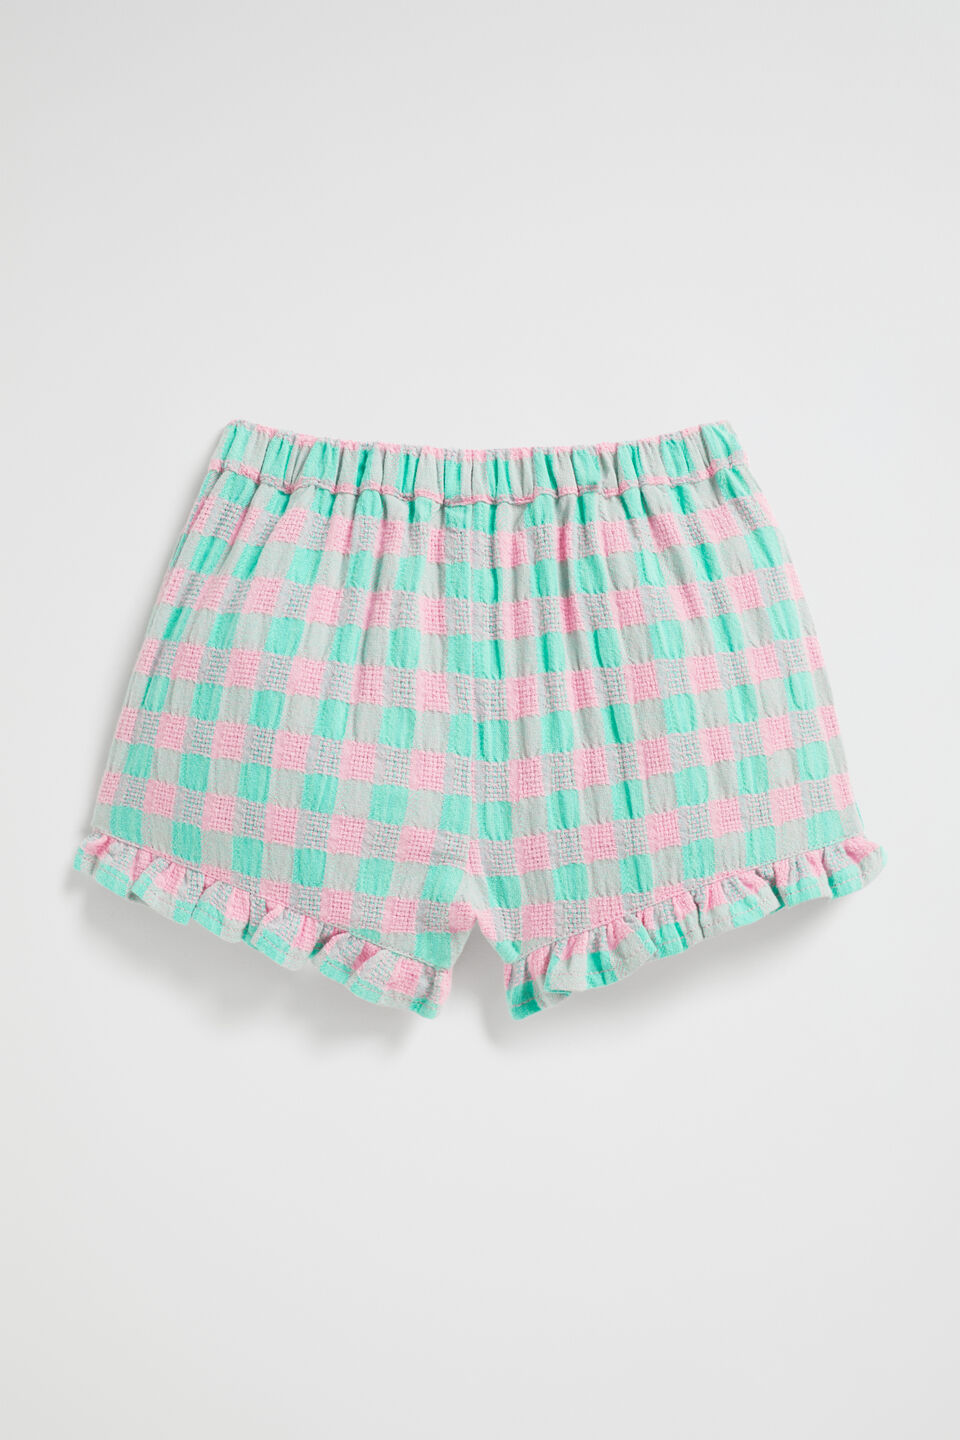 Gingham Shorts  Candy Pink